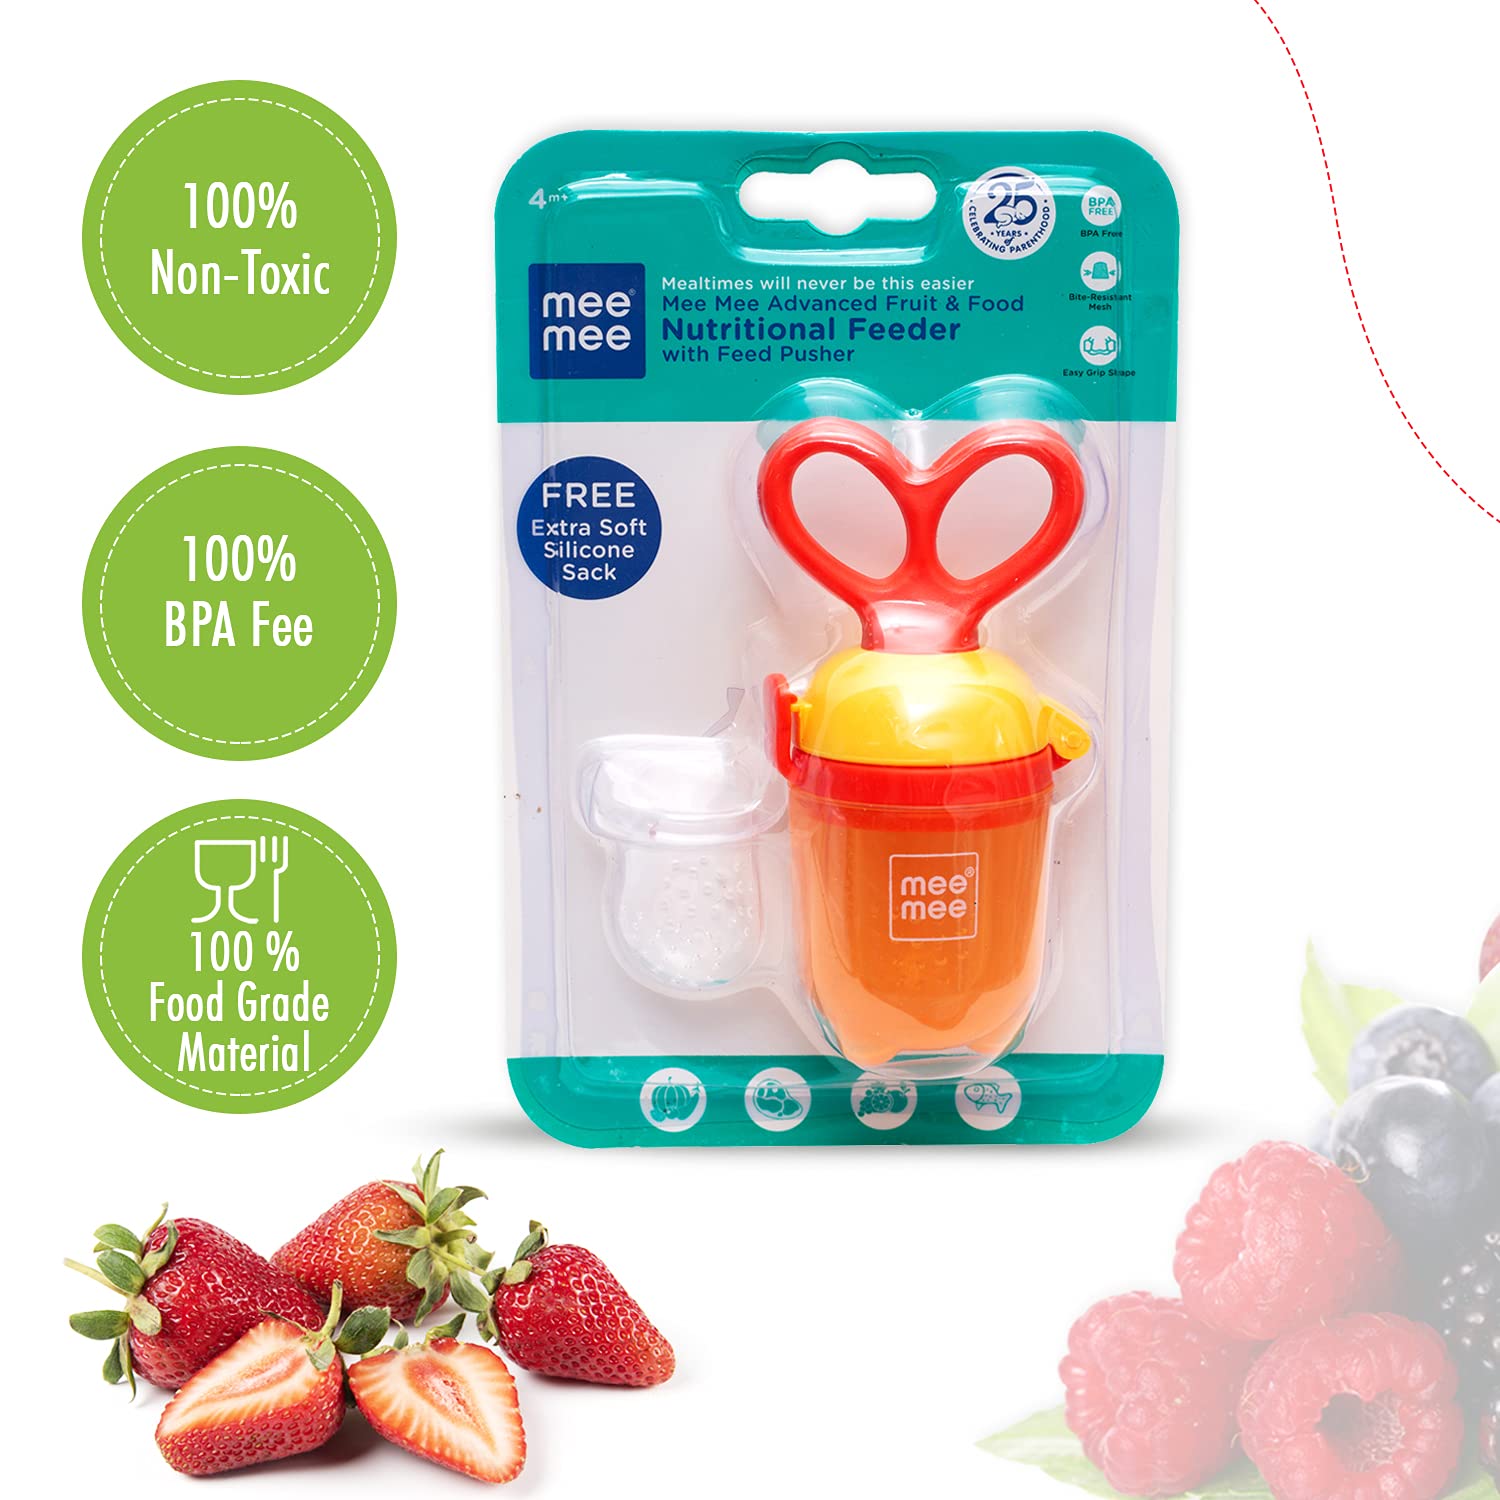 Mee Mee Advanced Fruit & Food Nutritional Feeder with Feed Pusher | BPA Free | Baby Grip Feeder to Push Food